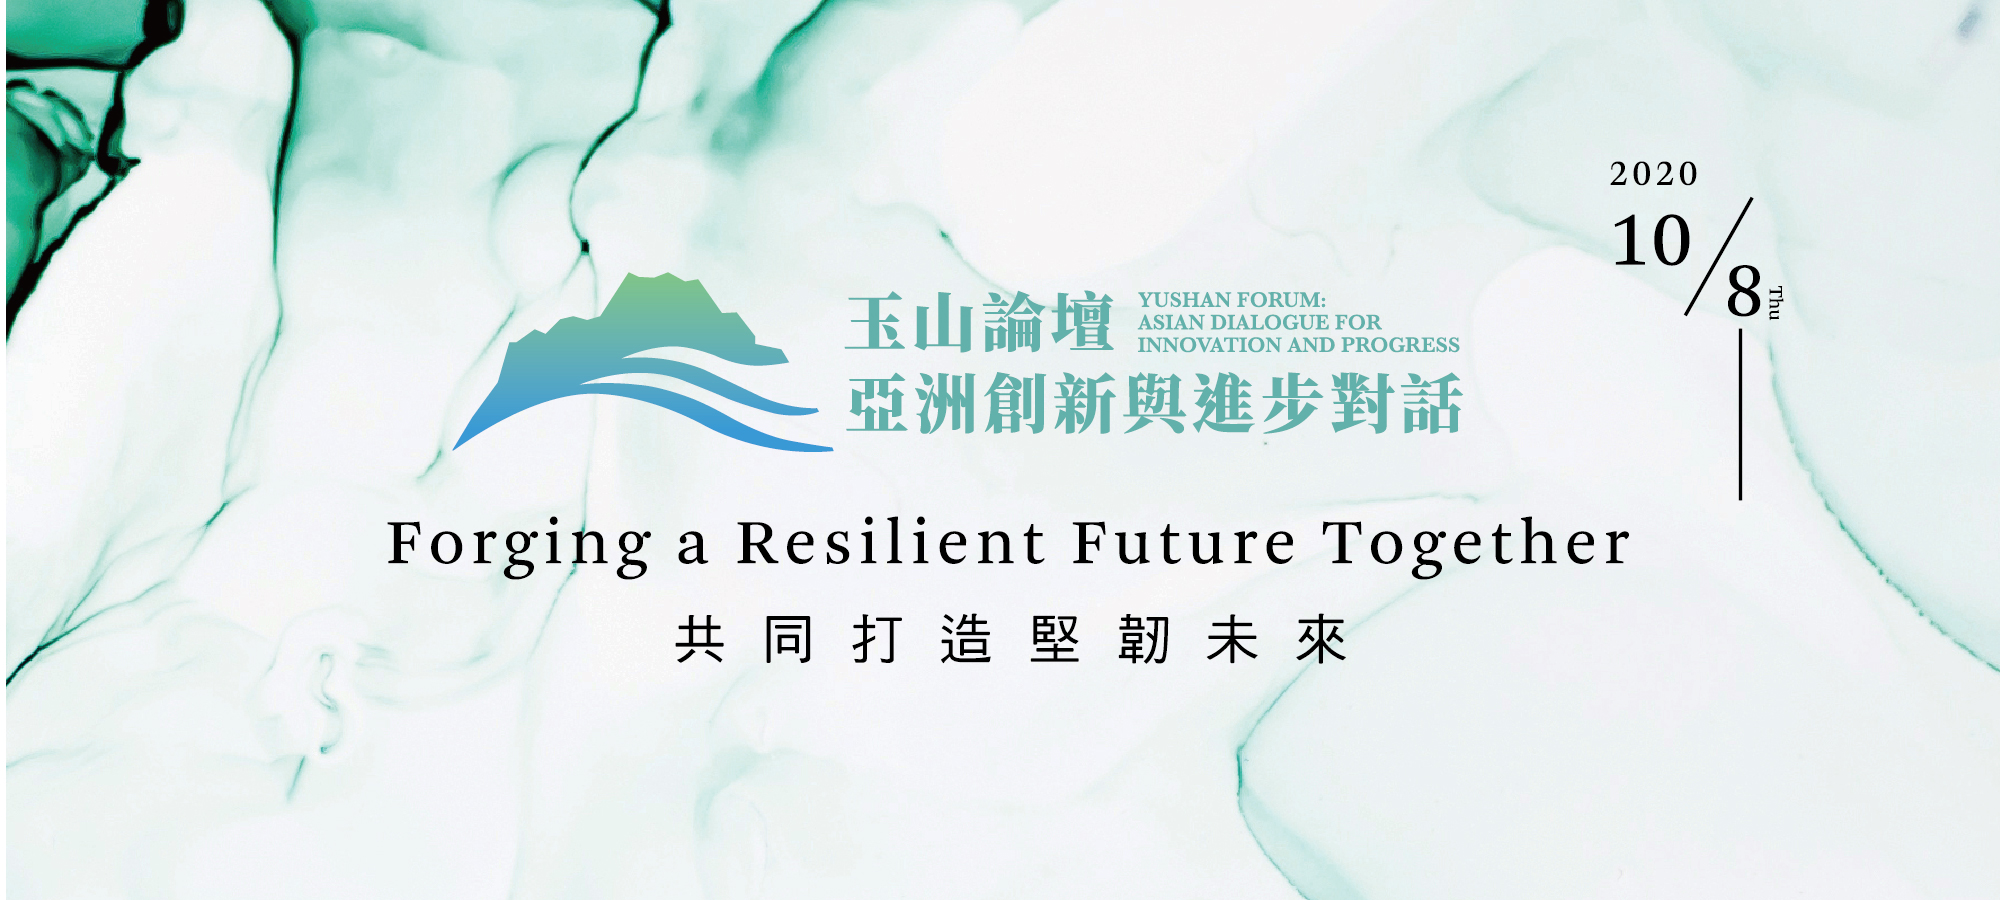 2020 Yushan Forum: Taiwan and New Southbound: Building a Resilient Future Together in the Post-Pandemic Era